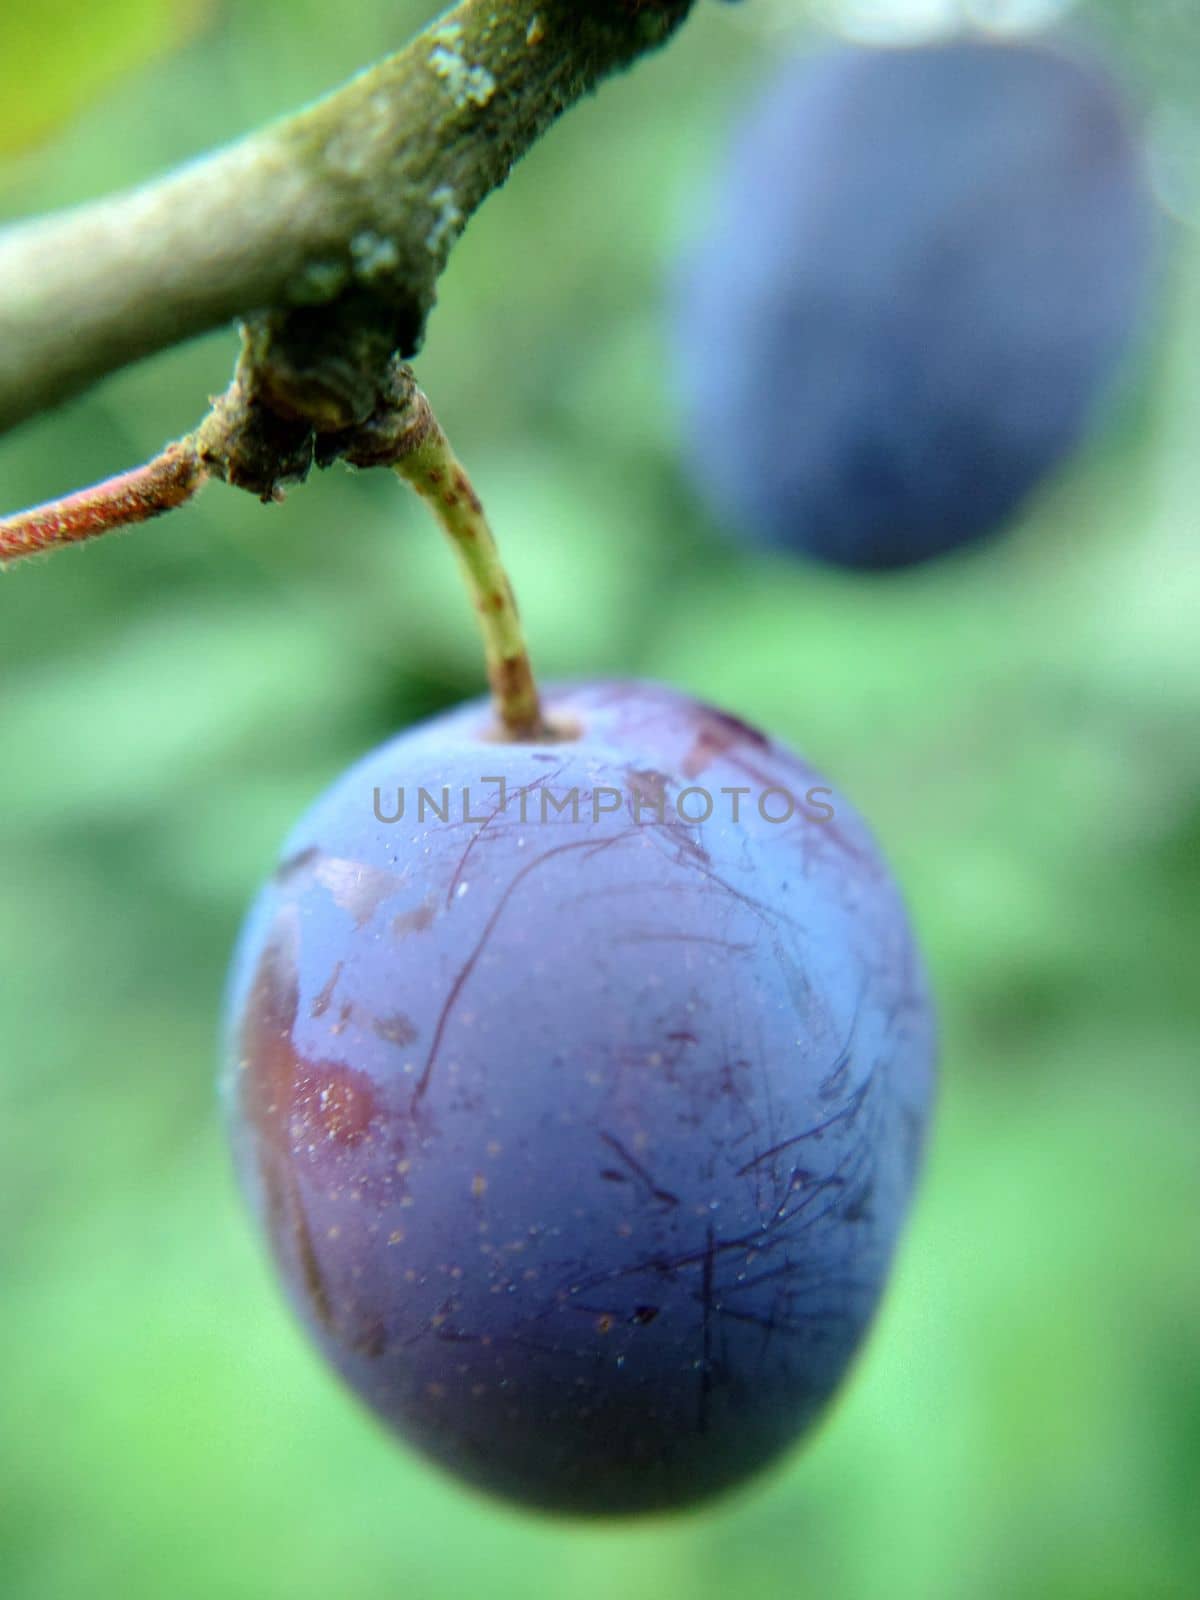 A ripe plum of blue color hangs on a branch in close-up by Mastak80